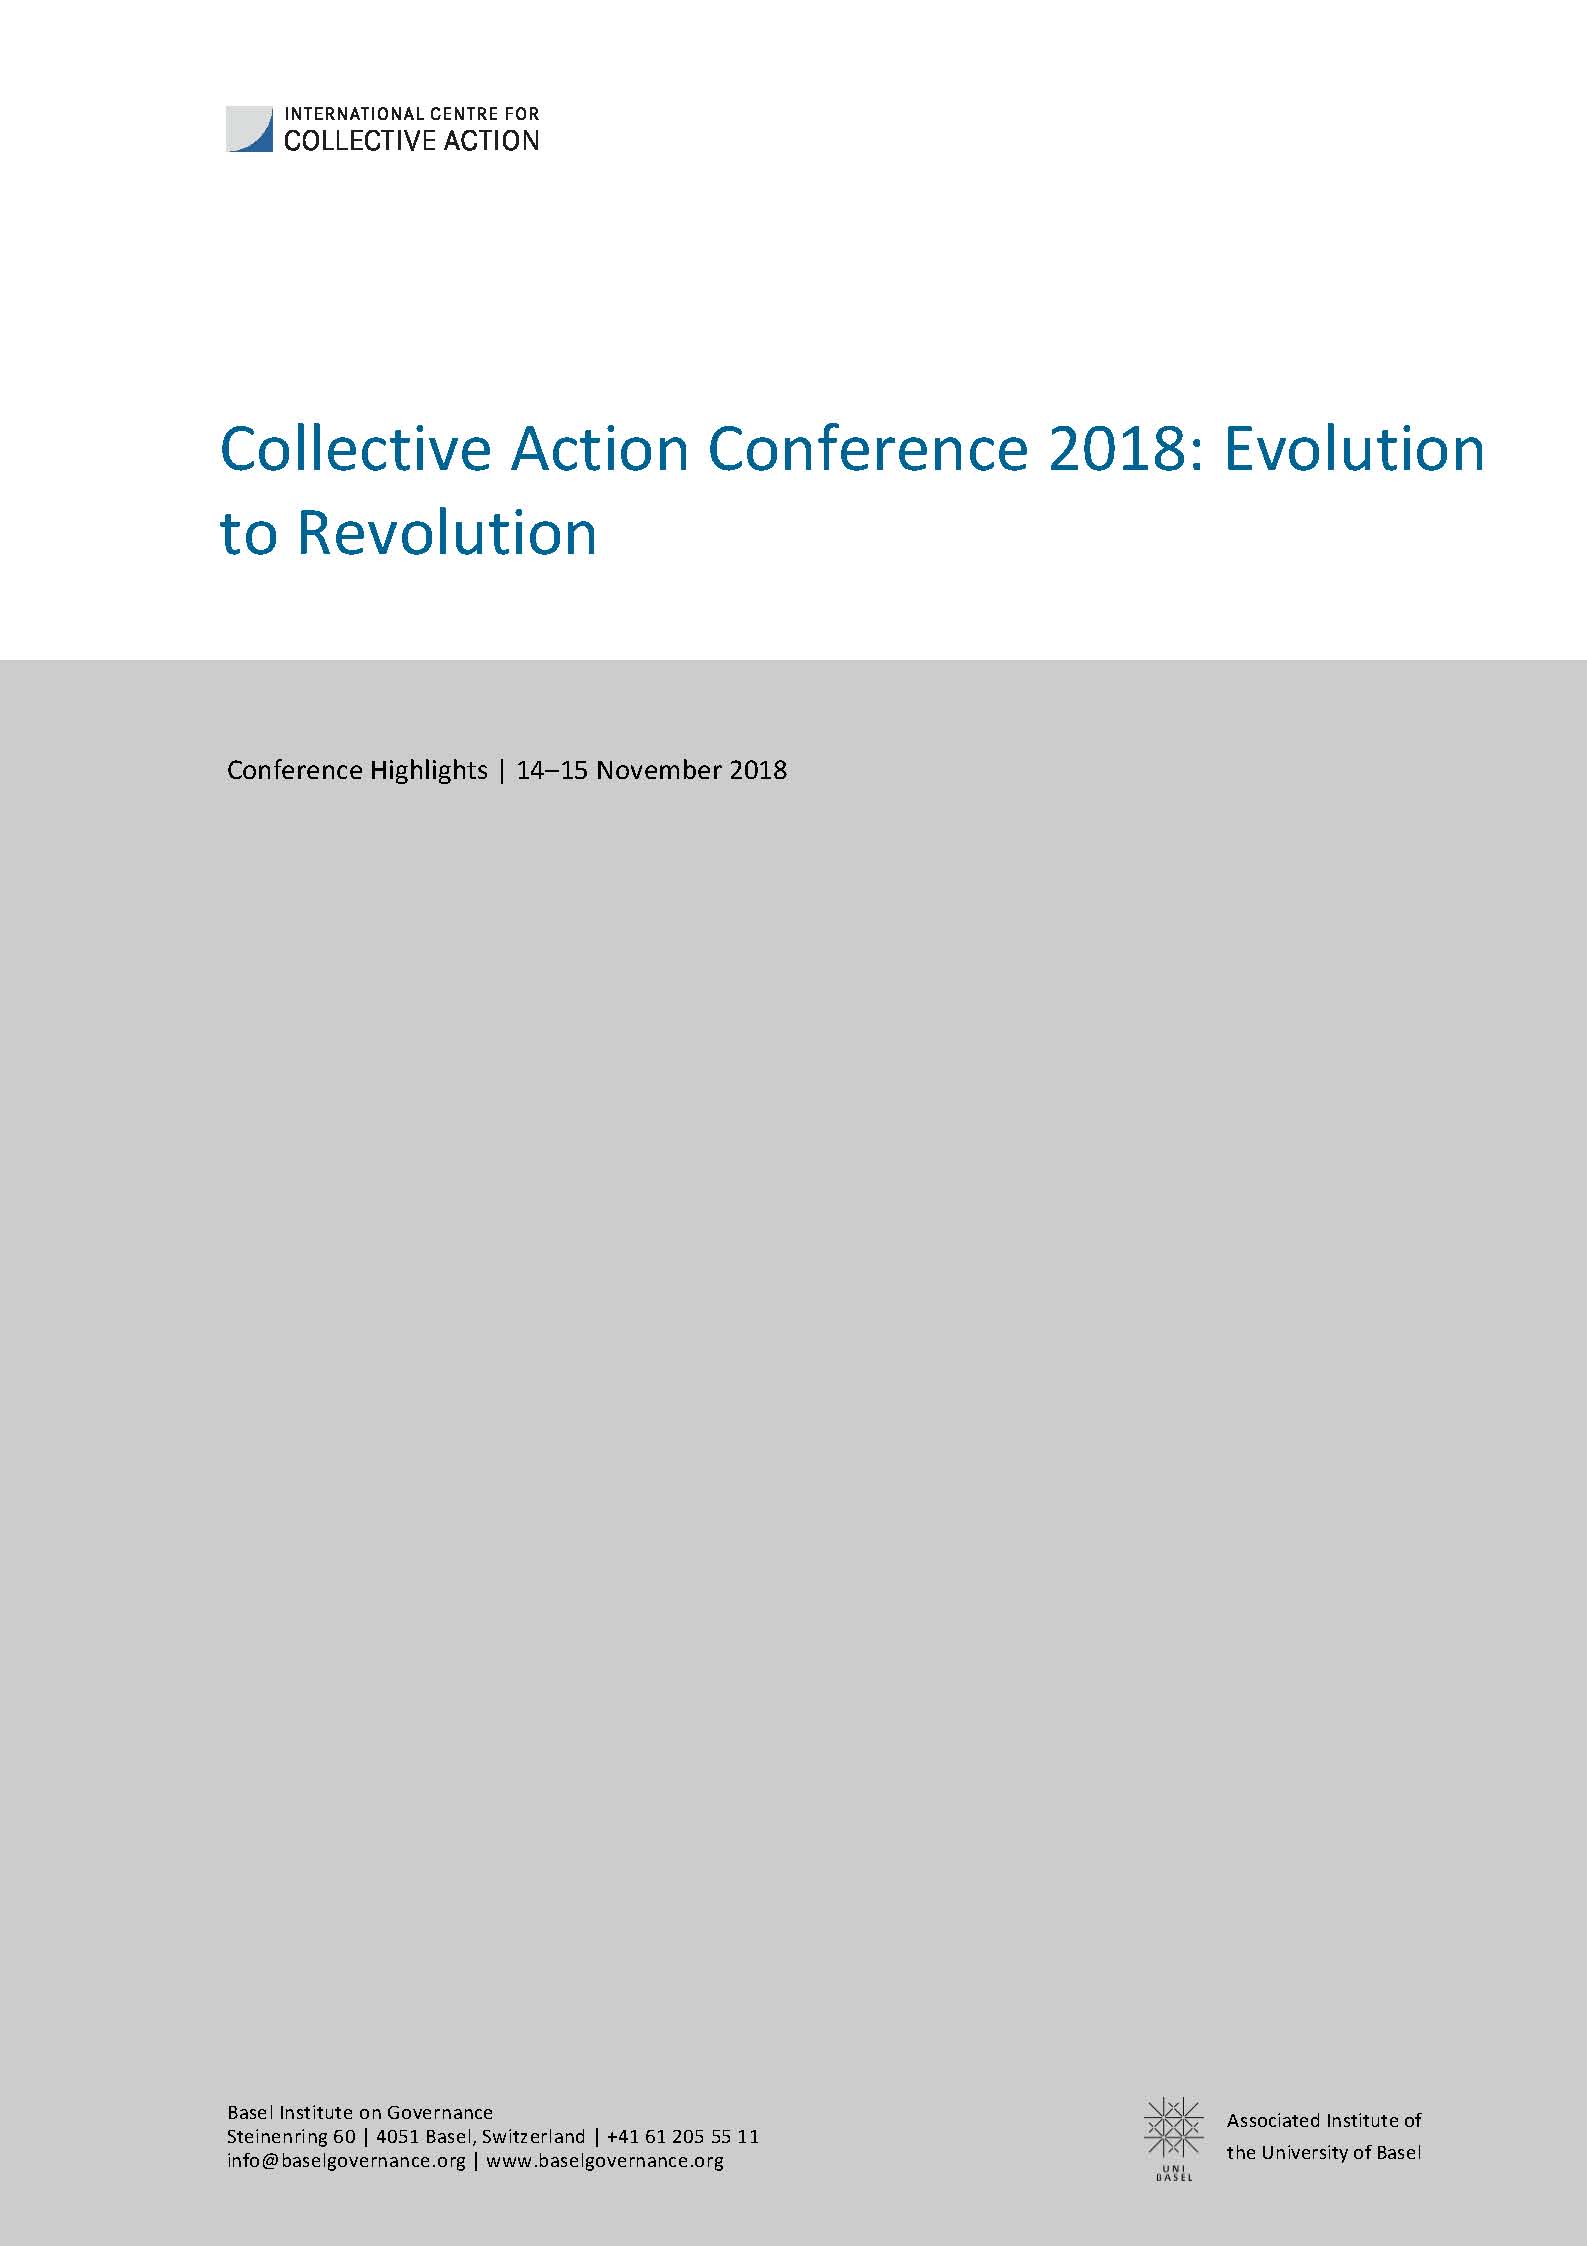 Collective Action Conference highlights cover page